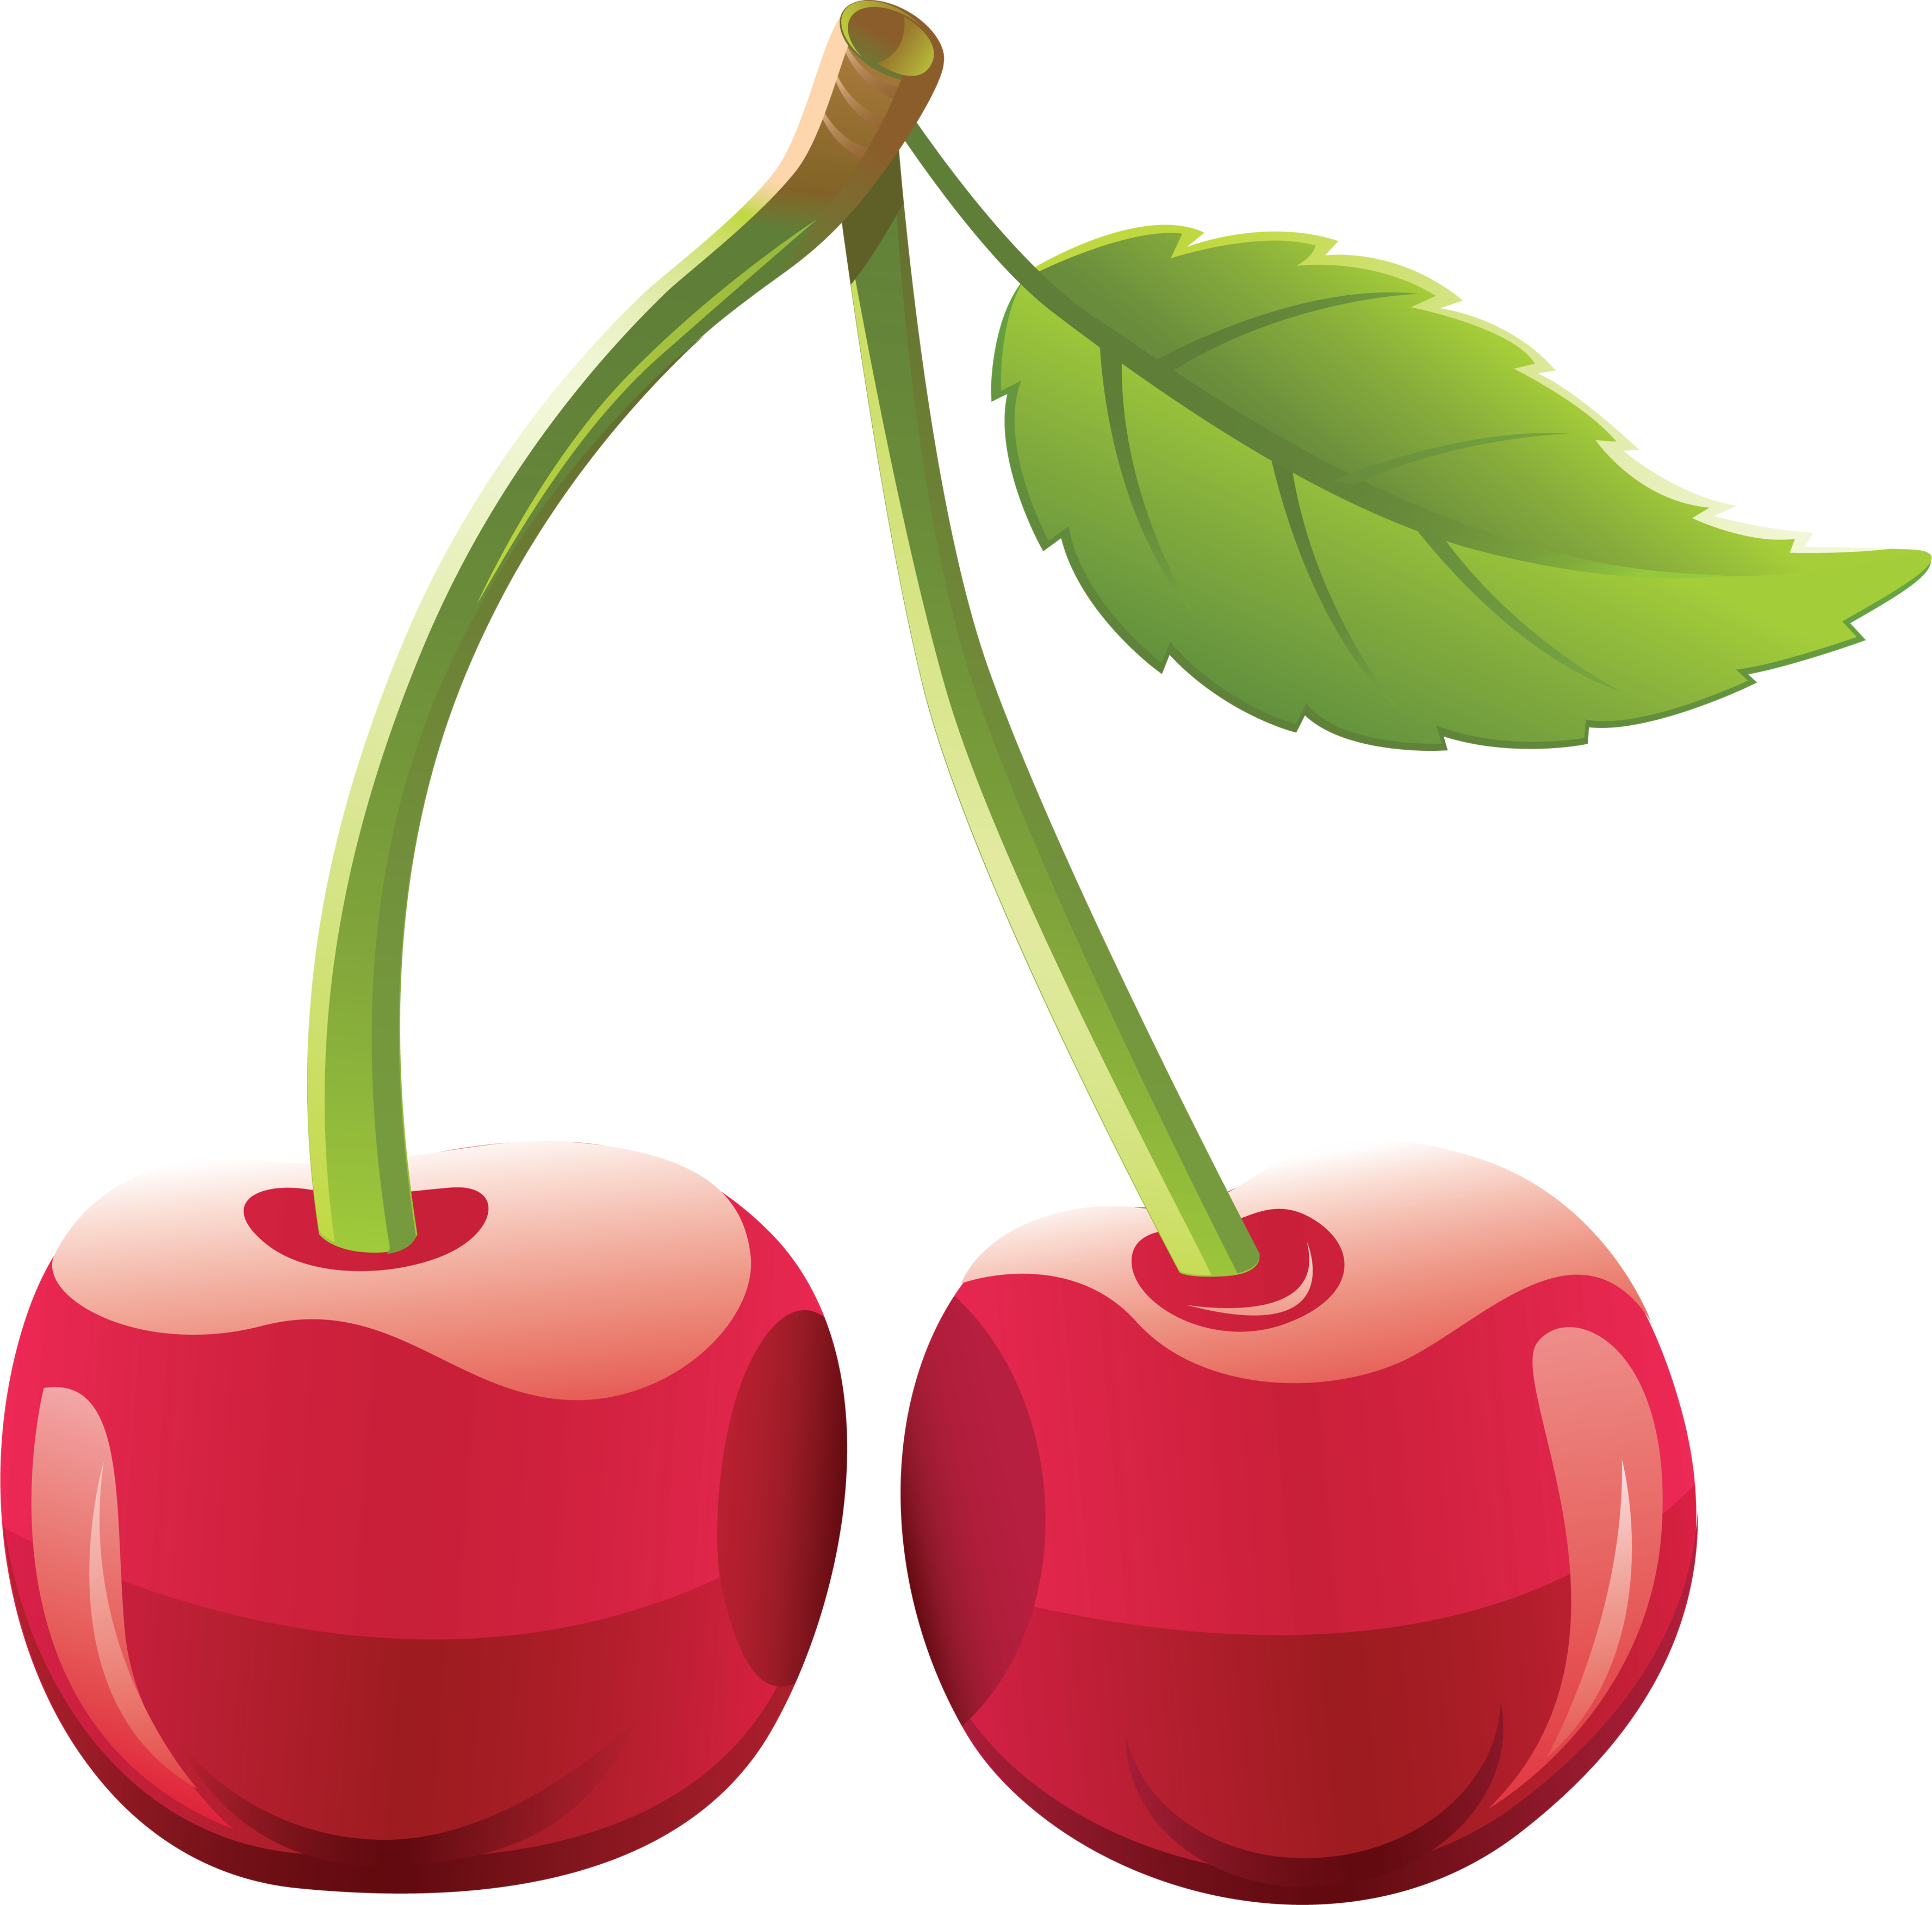 Cherries clipart cherry fruit. Png images free download